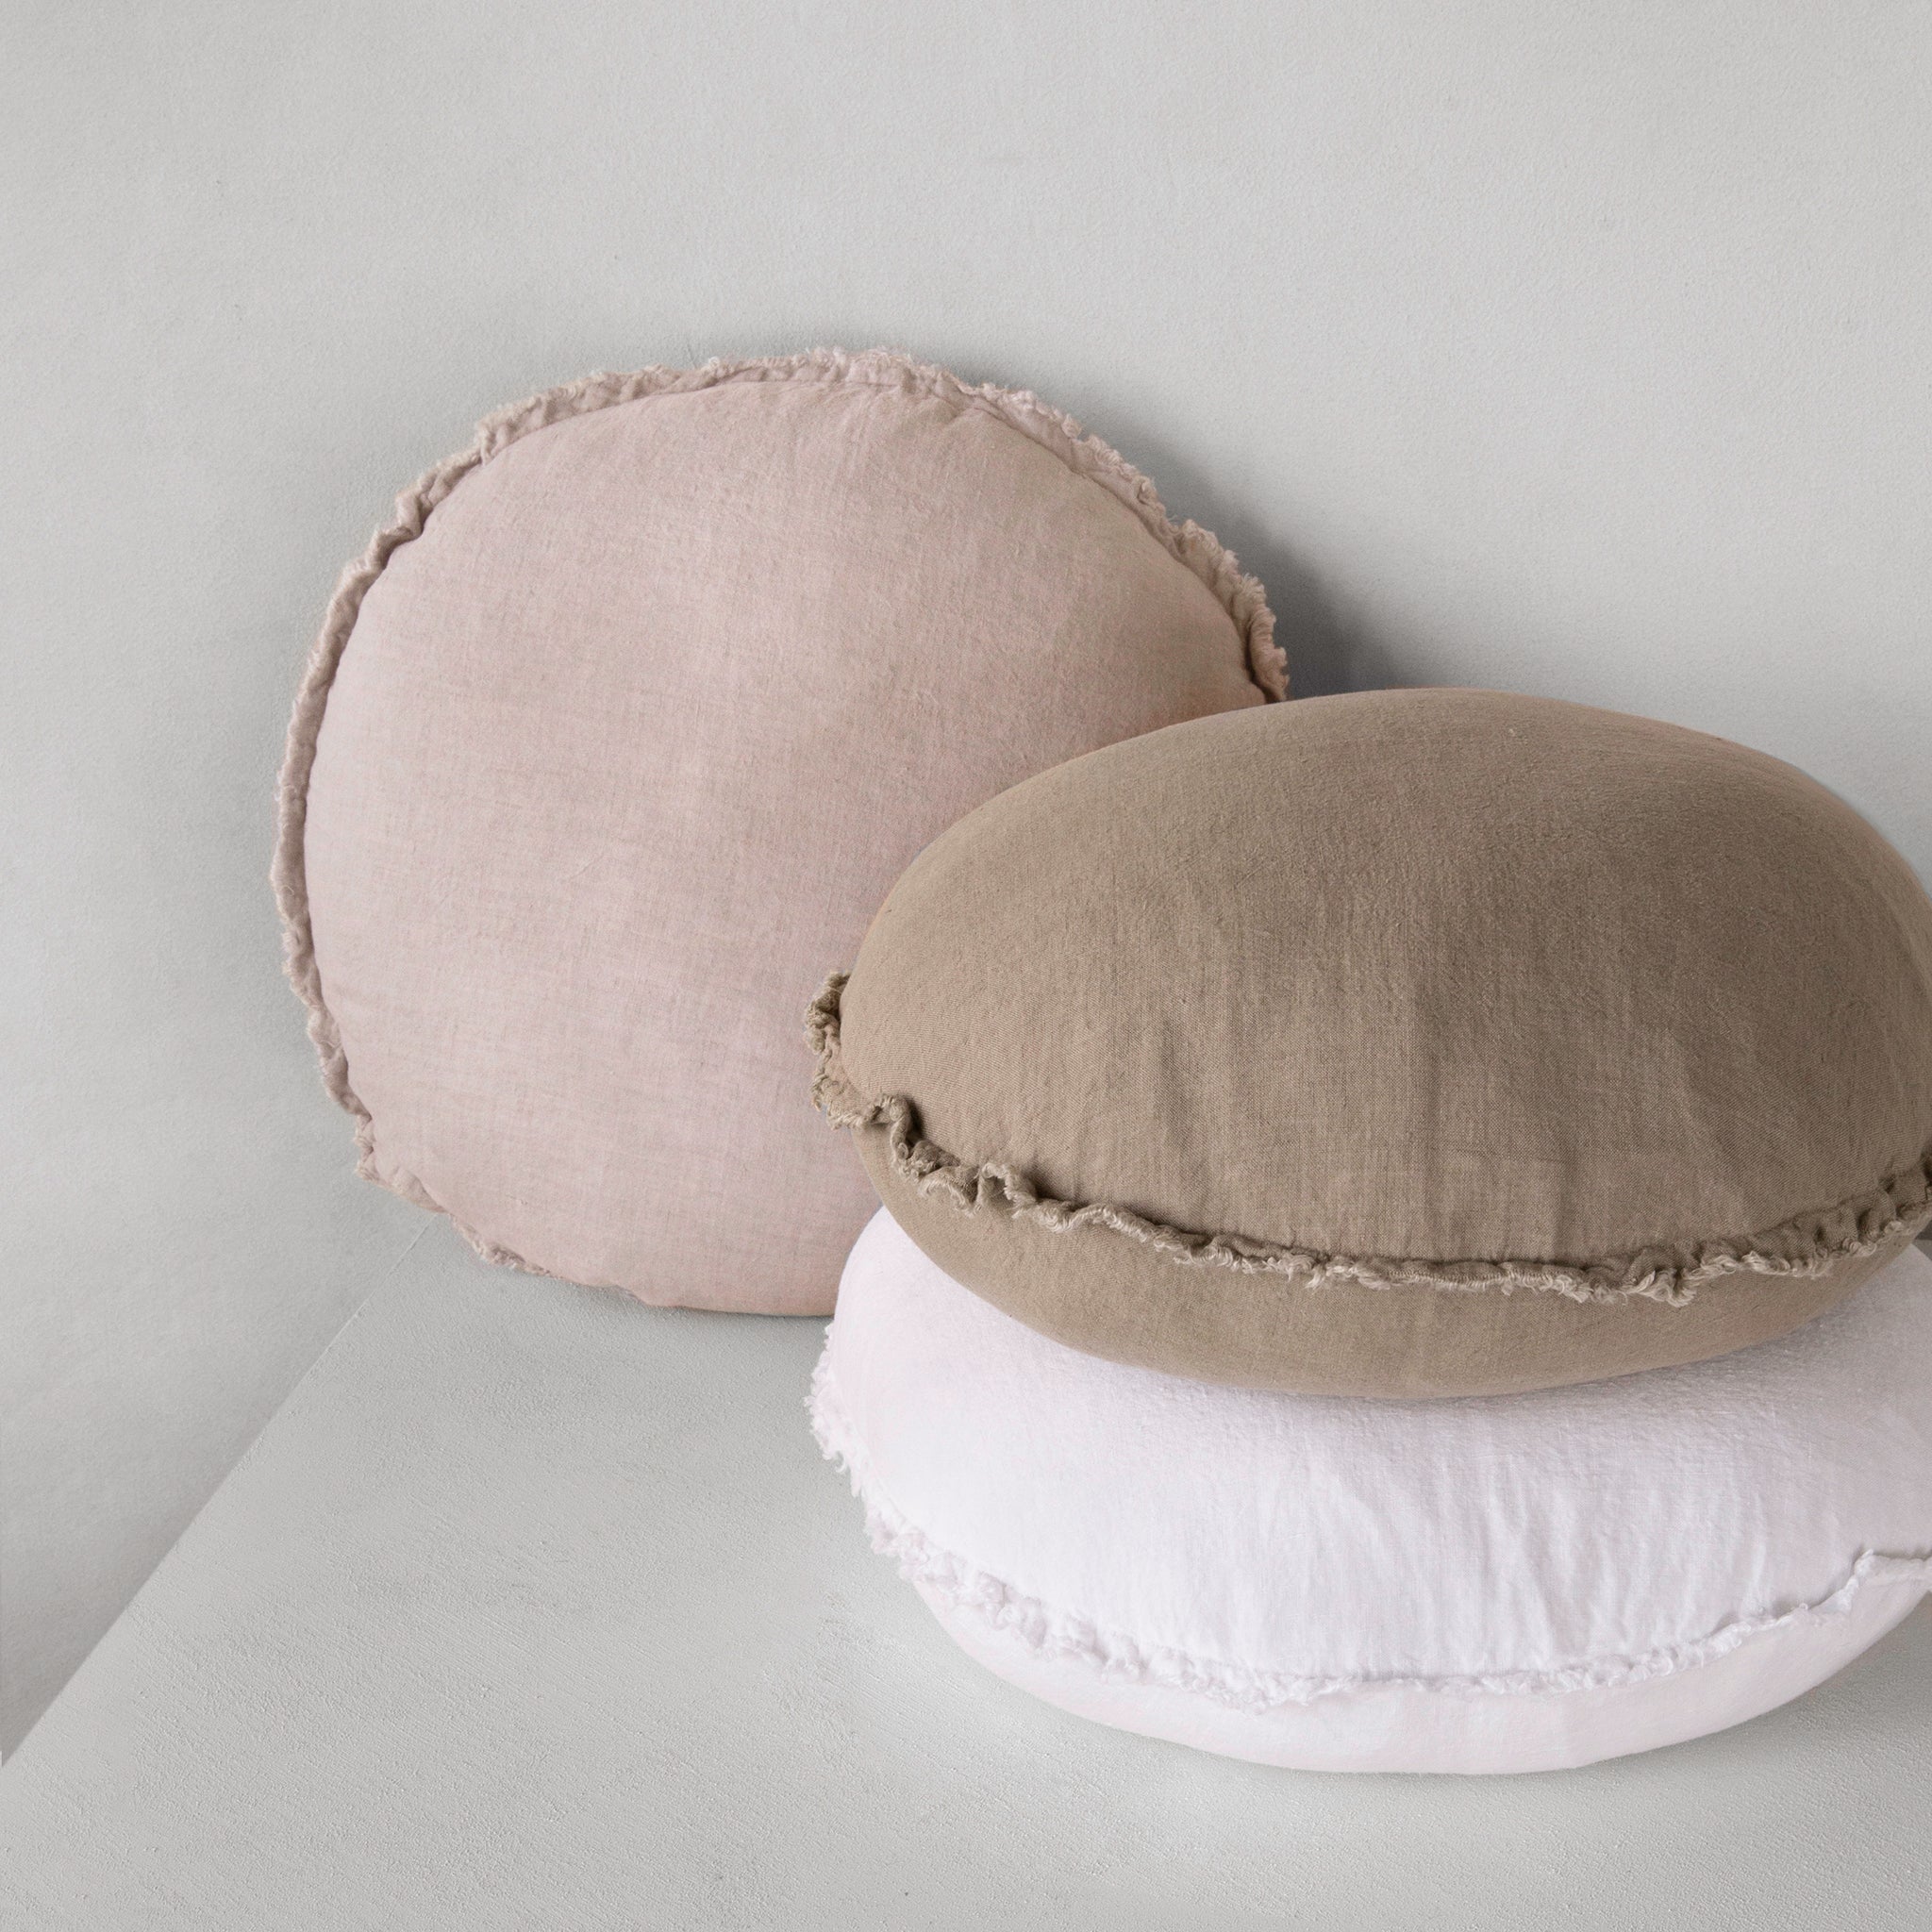 Round Linen Cushion | Earthy Pink | Hale Mercantile Co.